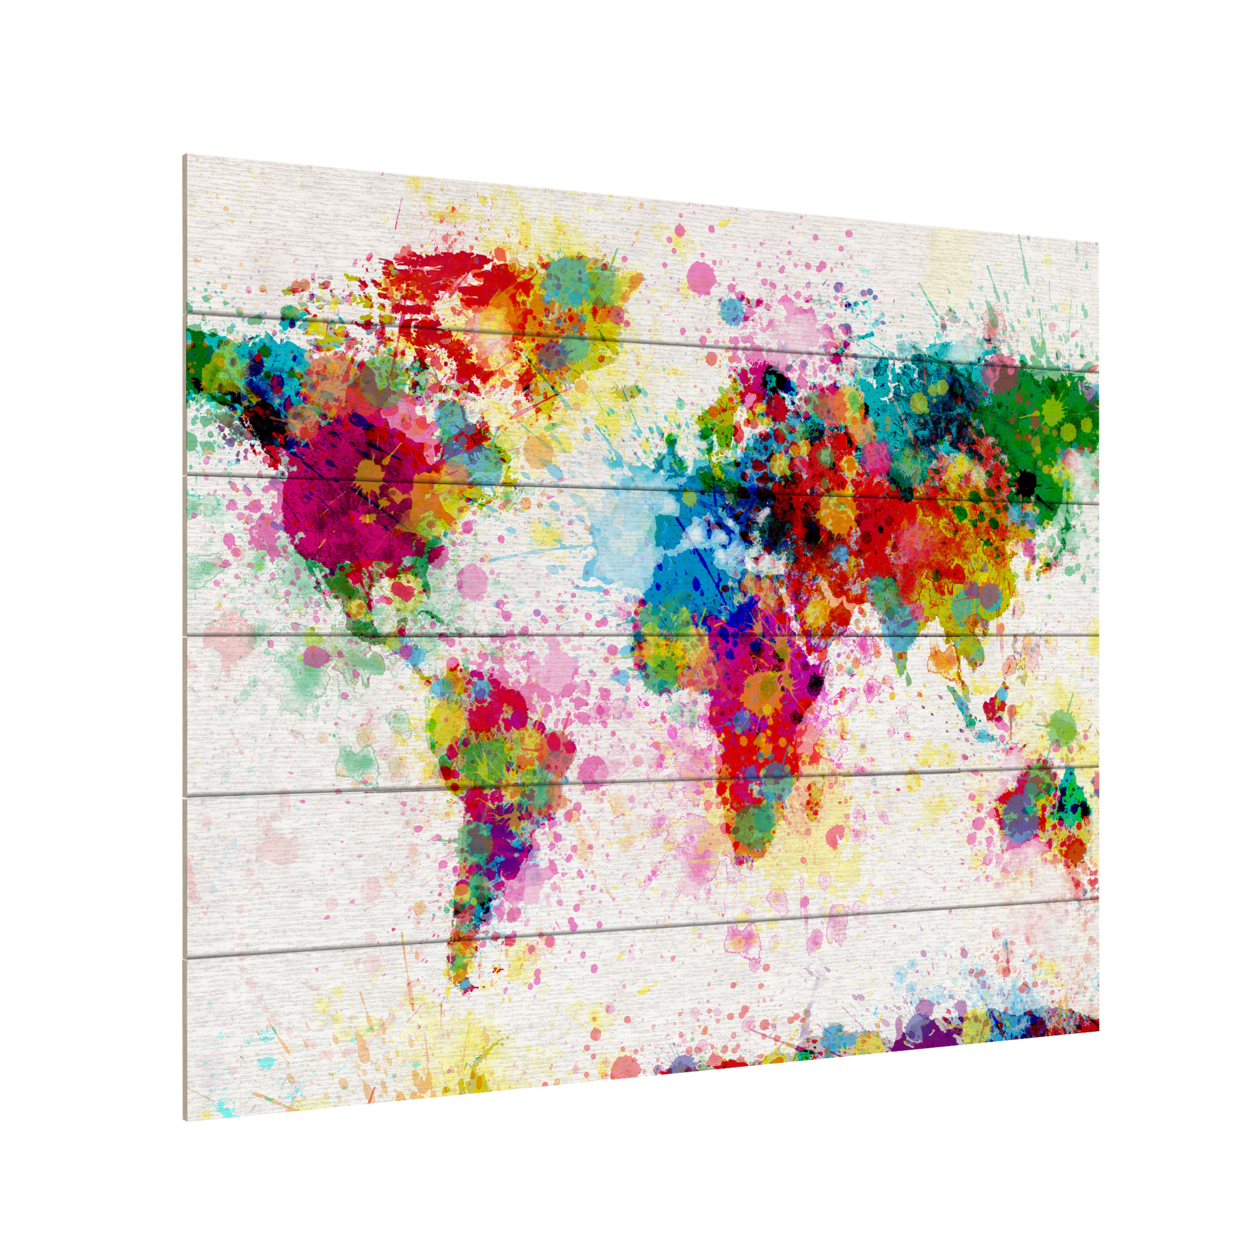 Wooden Slat Art 18 X 22 Inches Titled Paint Splashes World Map Ready To Hang Home Decor Picture